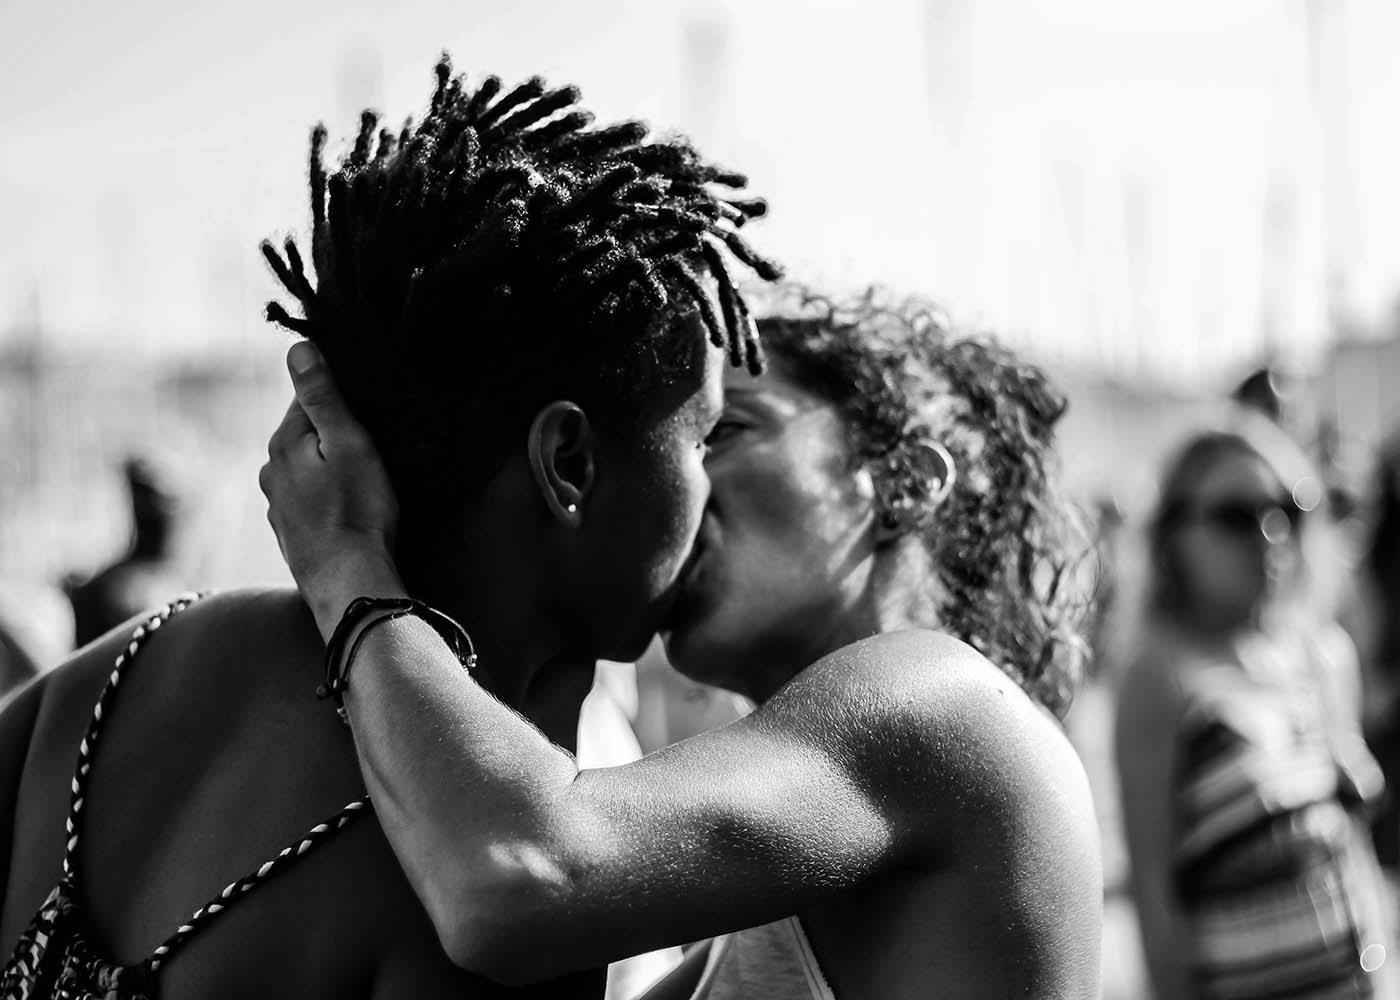 Couple kissing outside during a protest